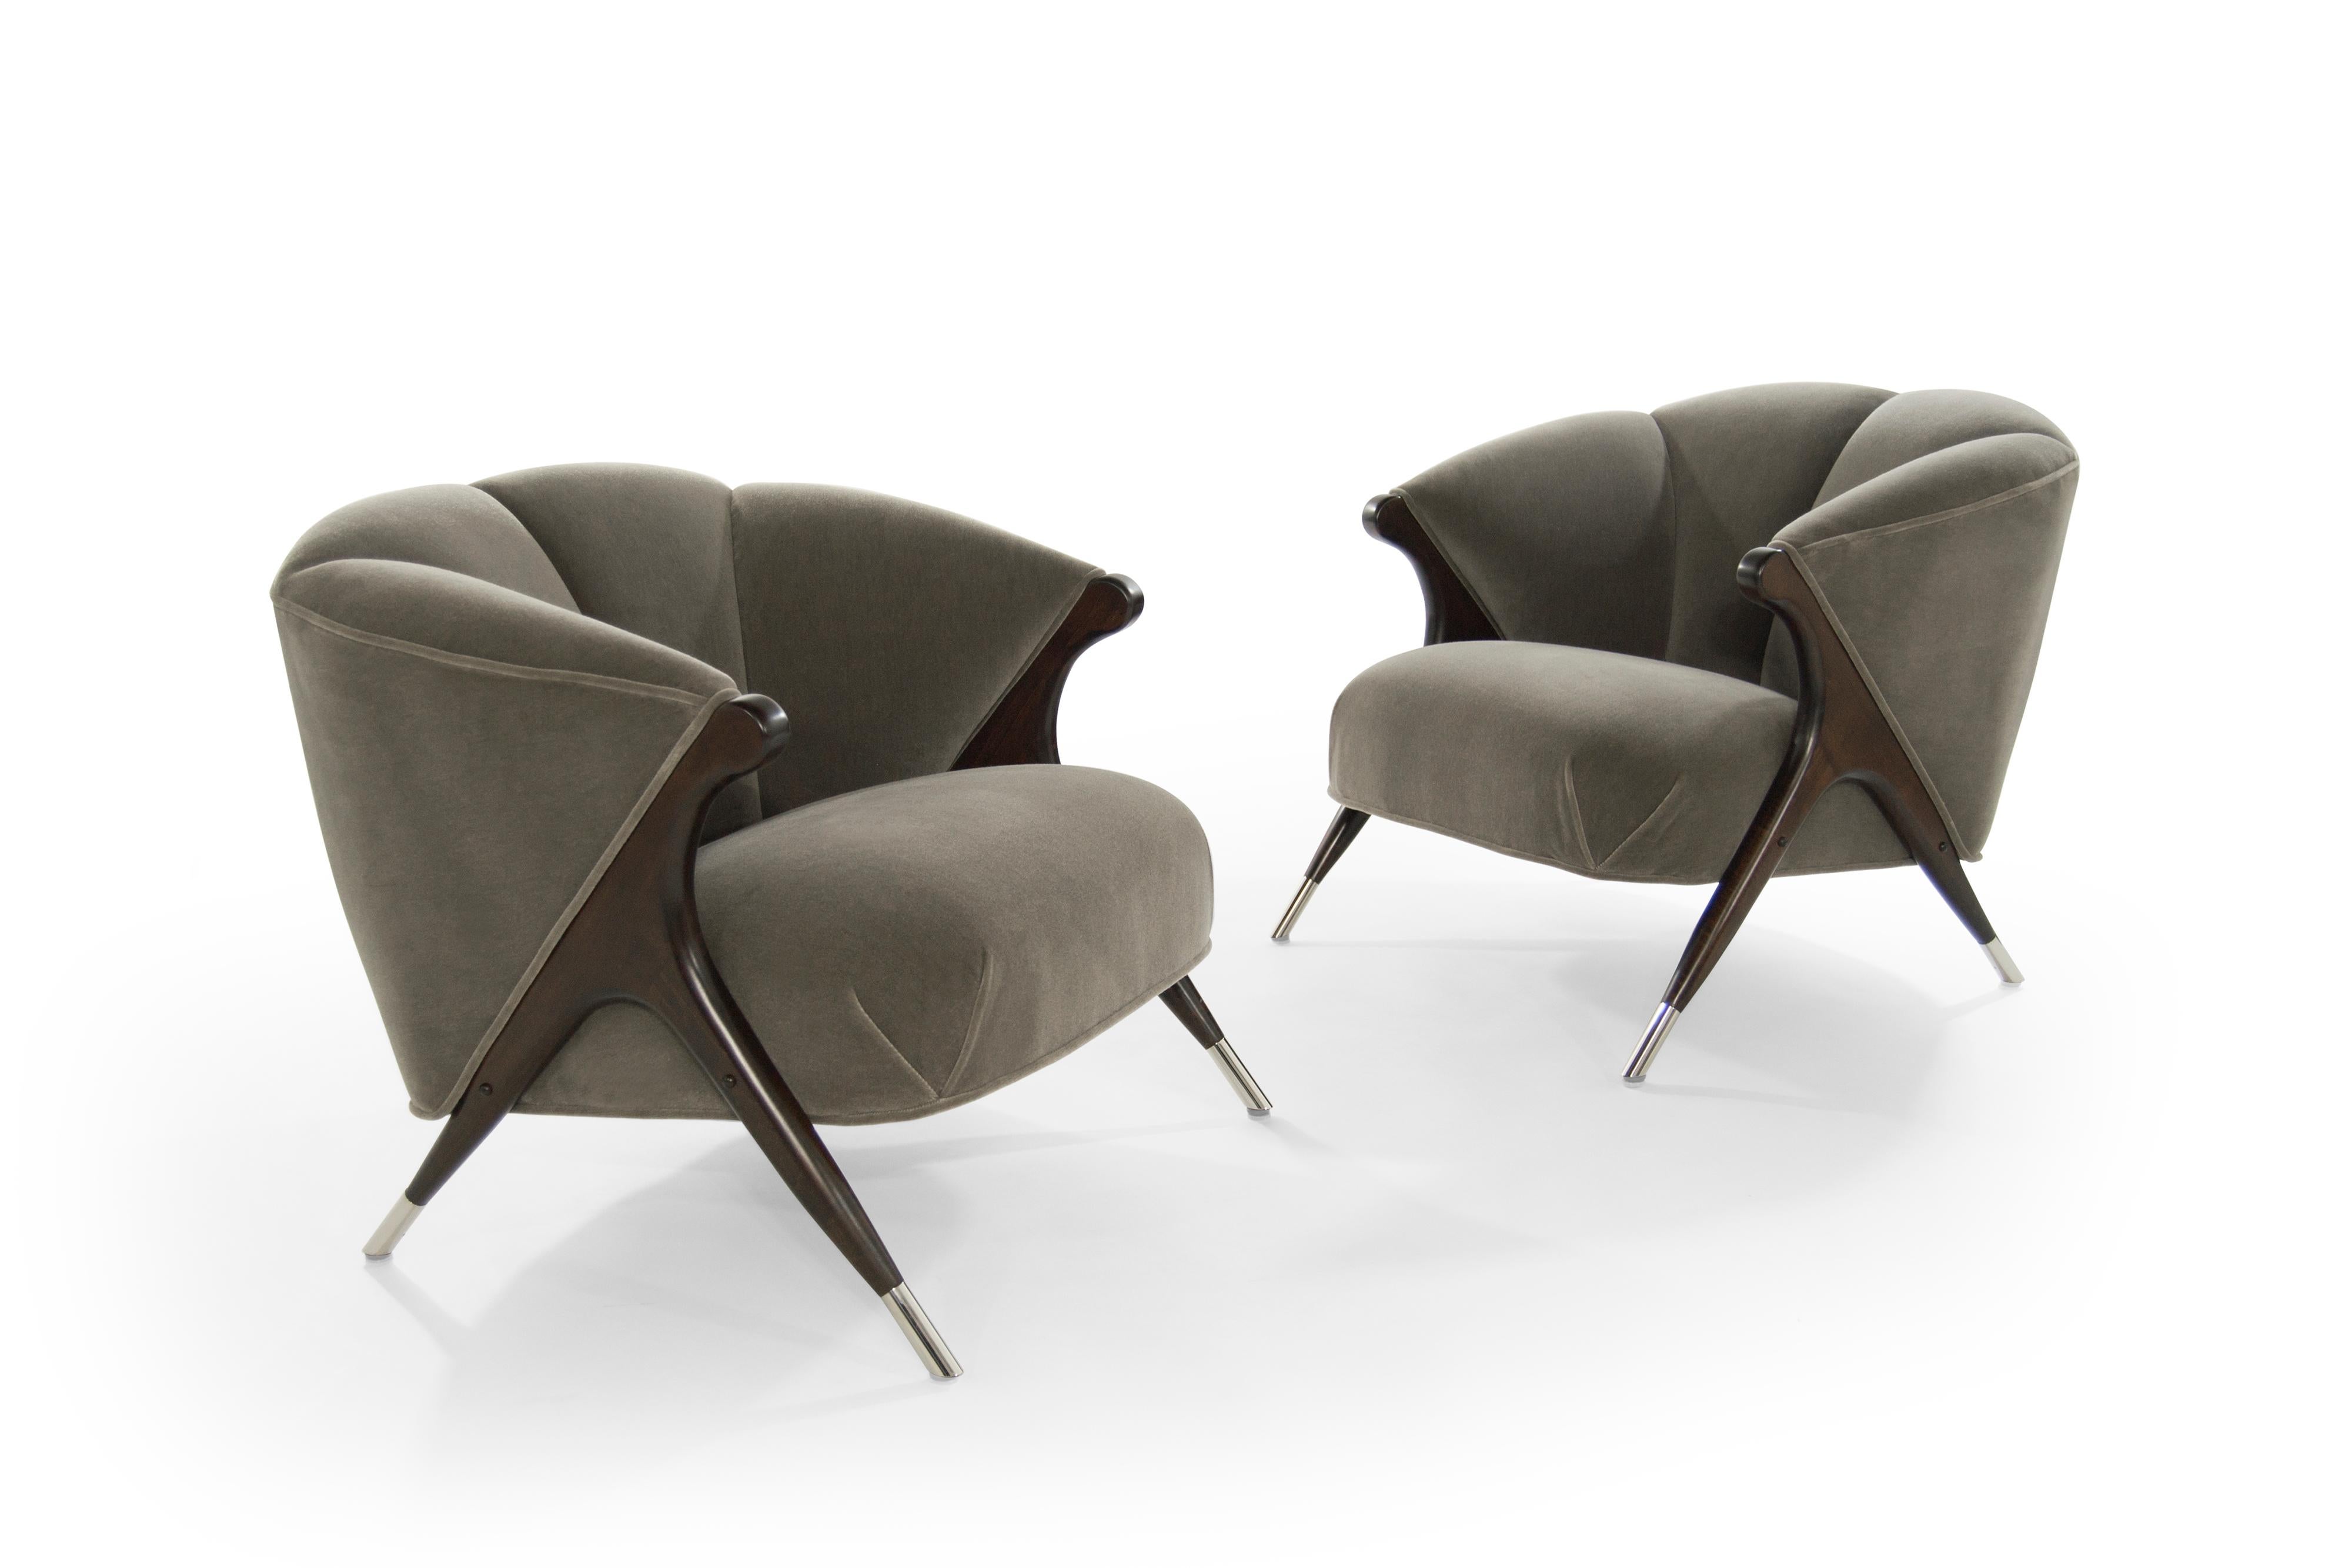 20th Century Modernist Karpen Lounge Chairs in Charcoal Mohair, 1950s